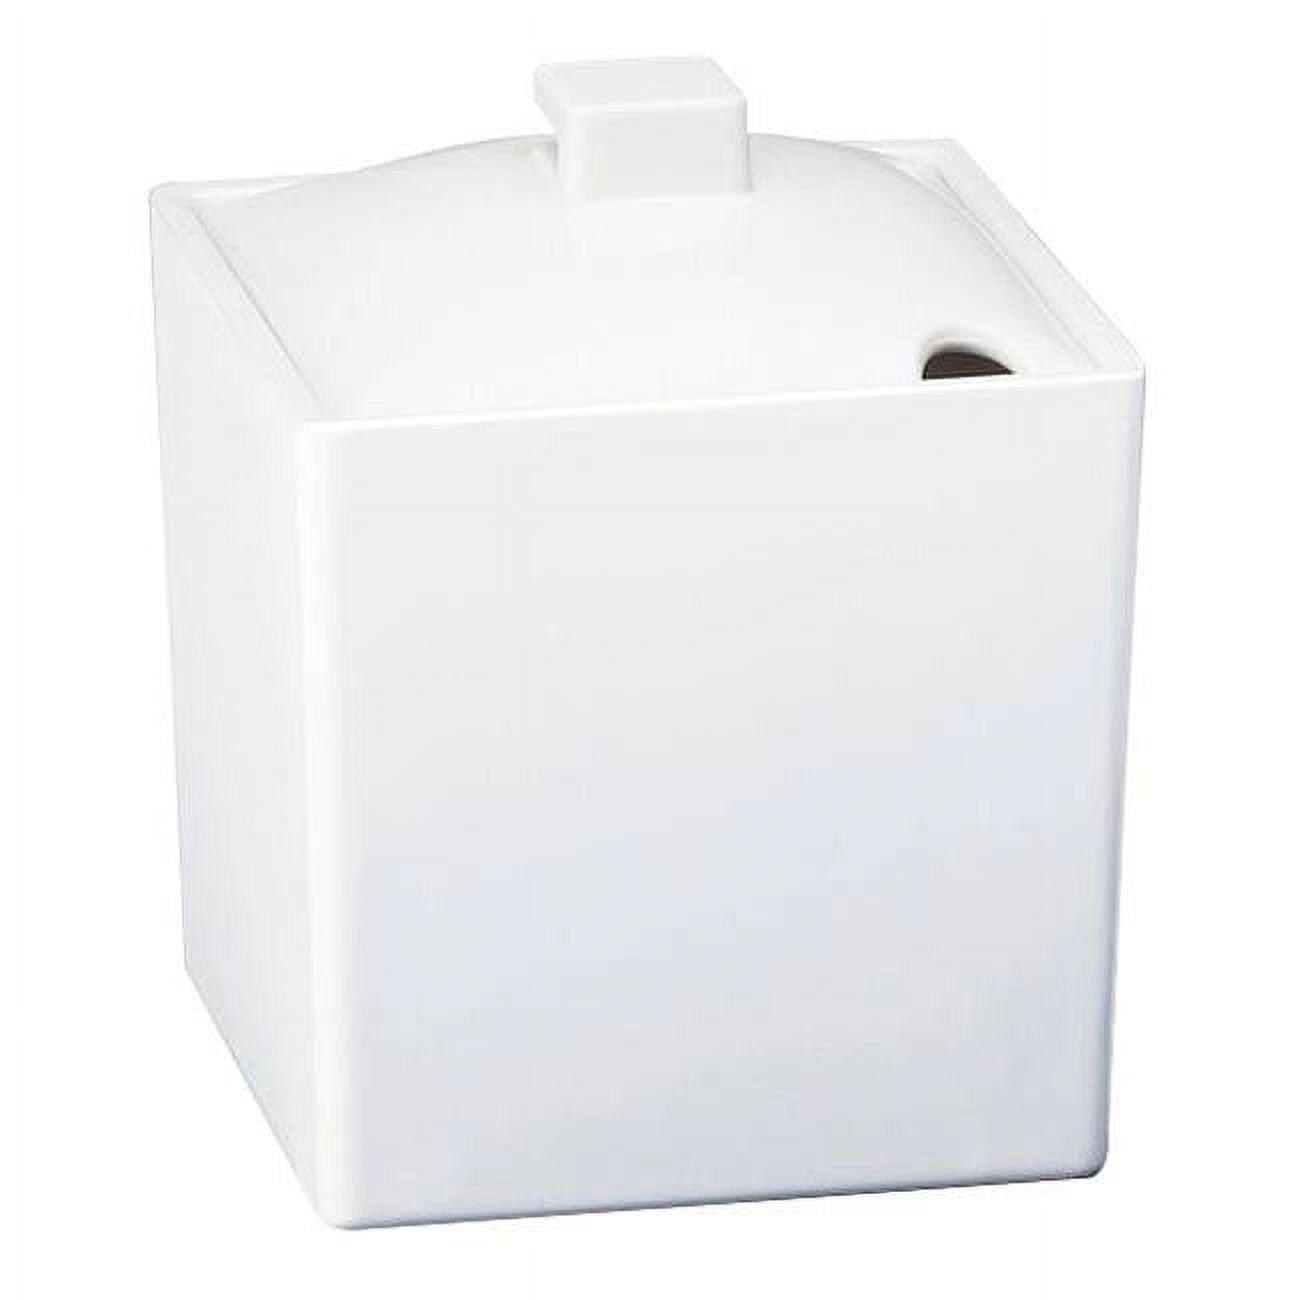 1432-15n Eco Modern White Melamine Jar With Notched Lid - 4 X 4 X 4 In.